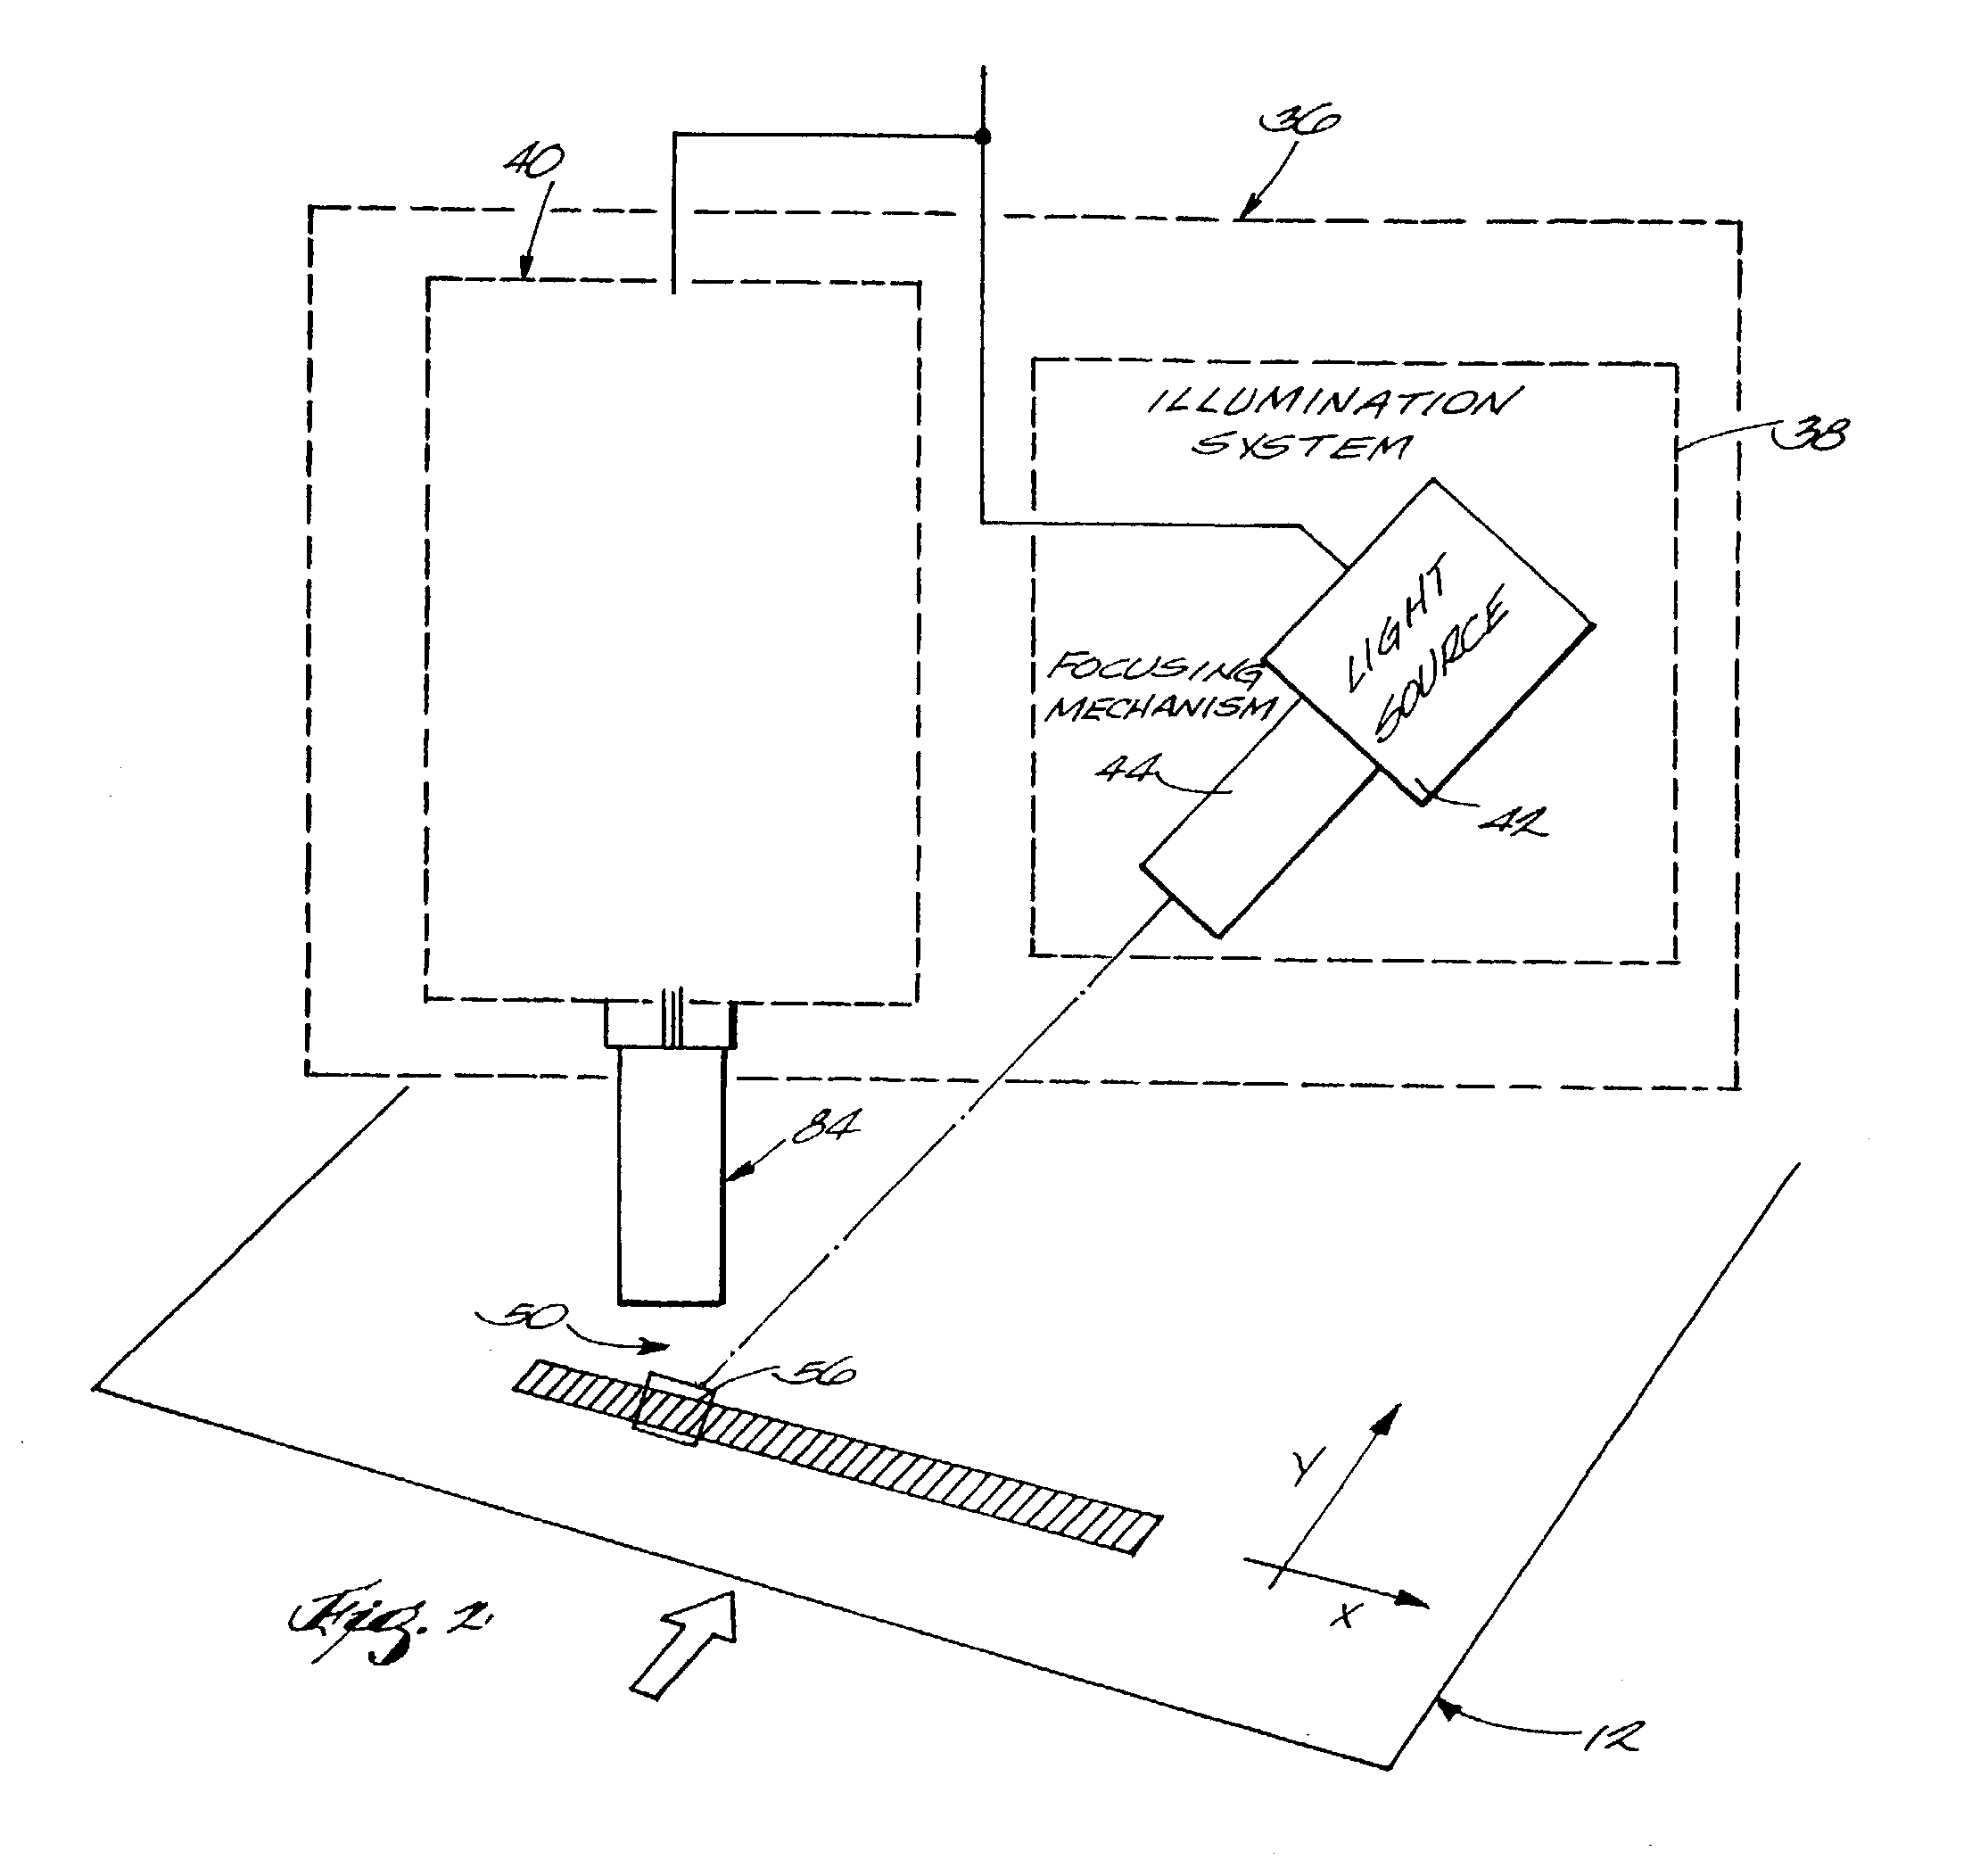 System and method for measuring color on a printing press